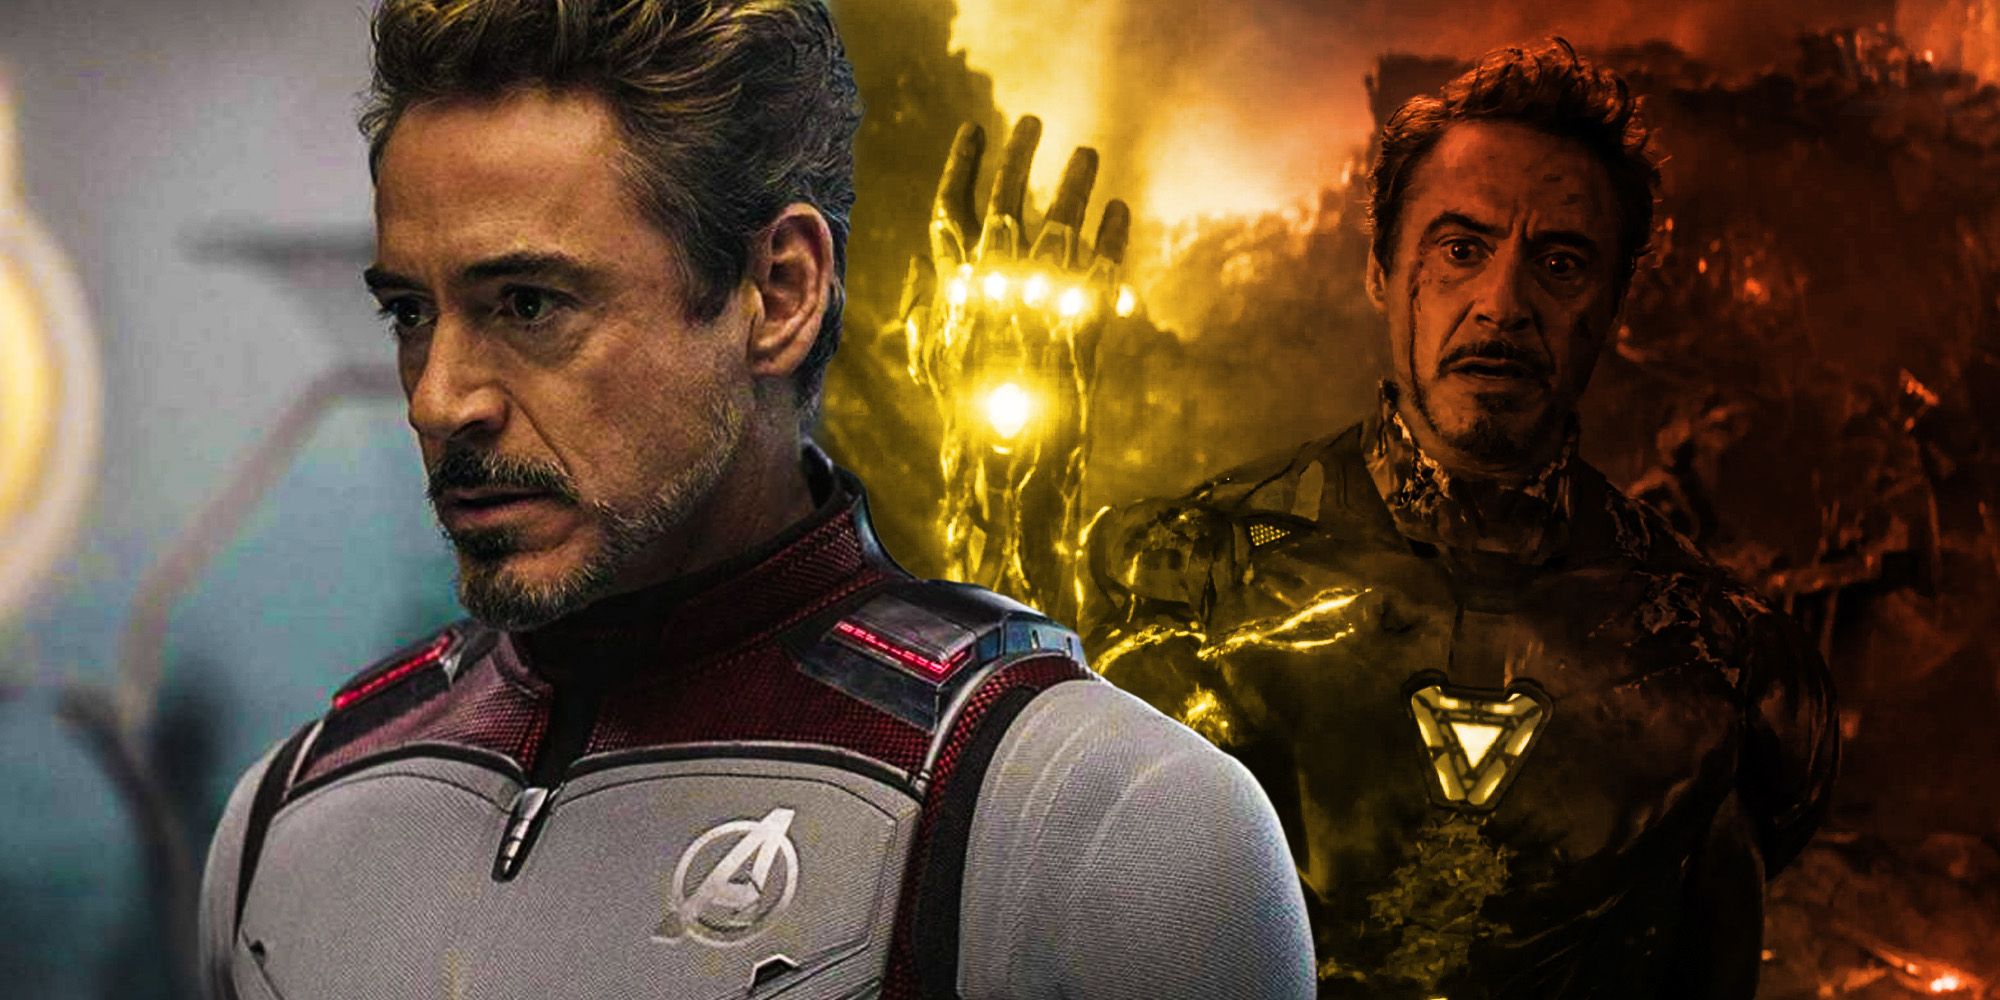 Iron man most heroic moment was not endgame snap